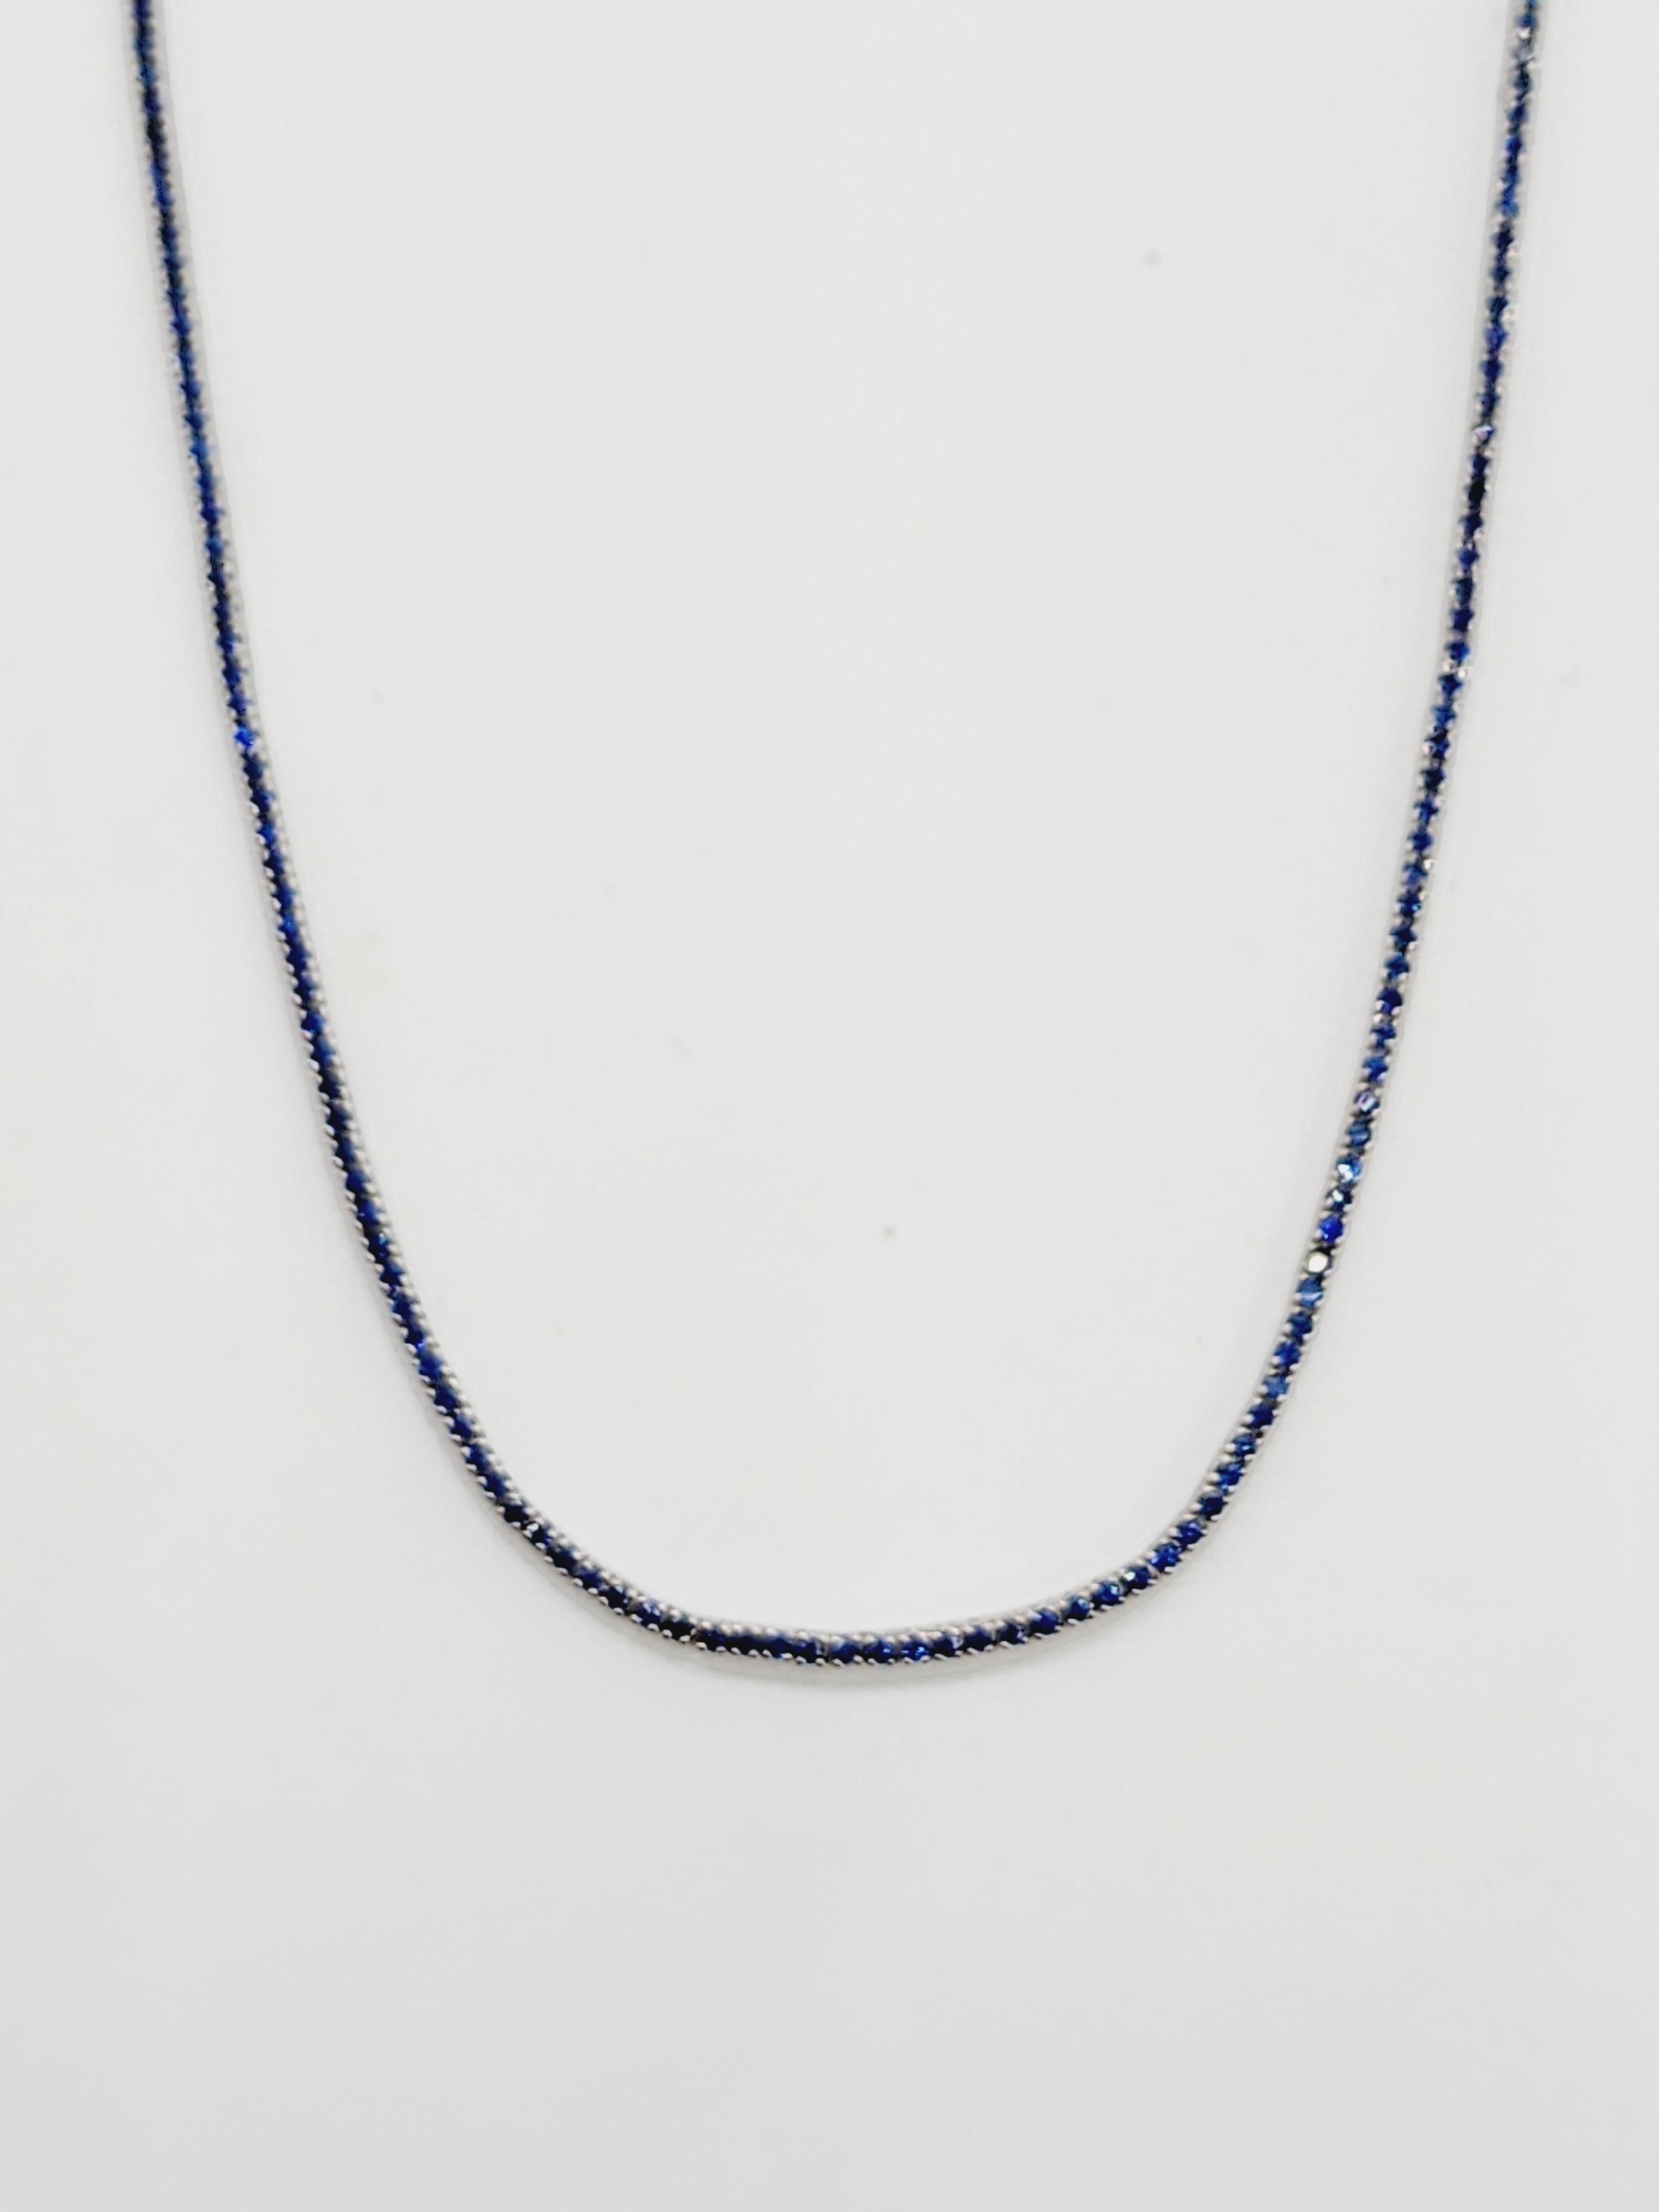 4.25 Carats Sapphire Tennis Necklace 14 Karat White Gold 18'' In New Condition For Sale In Great Neck, NY